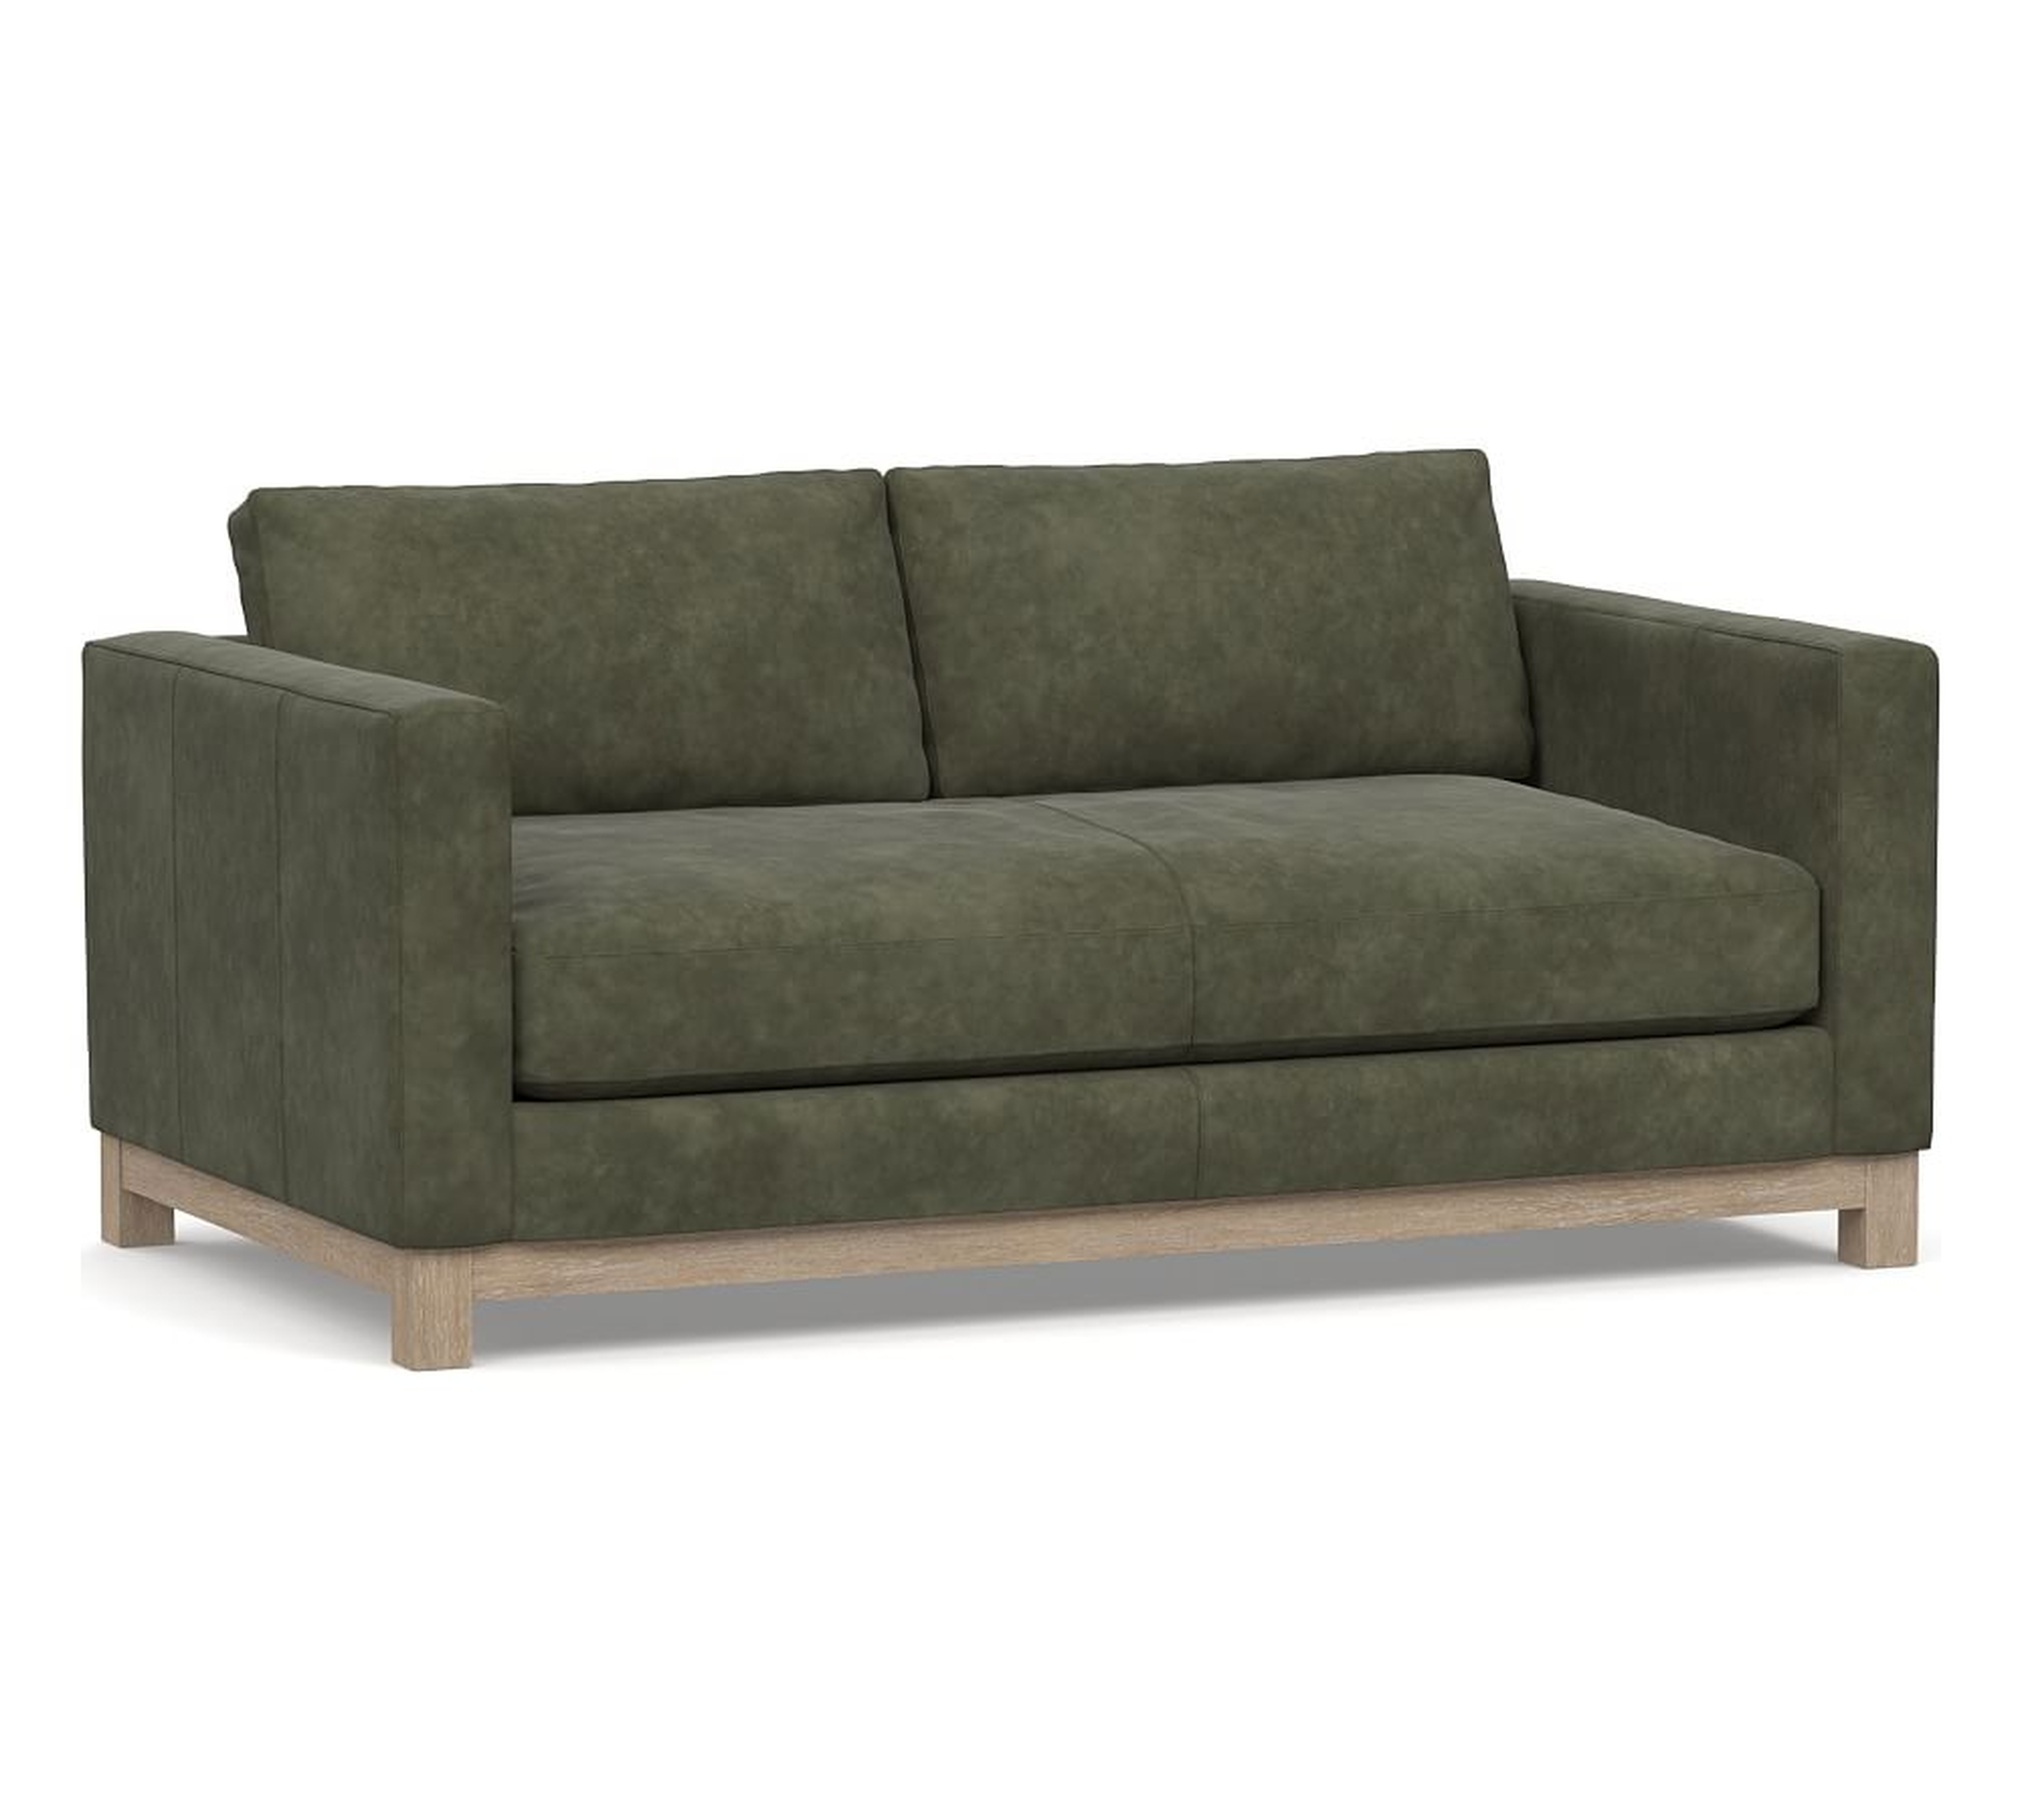 Jake Leather Loveseat 70" with Wood Legs, Down Blend Wrapped Cushions Nubuck Loden Green - Pottery Barn